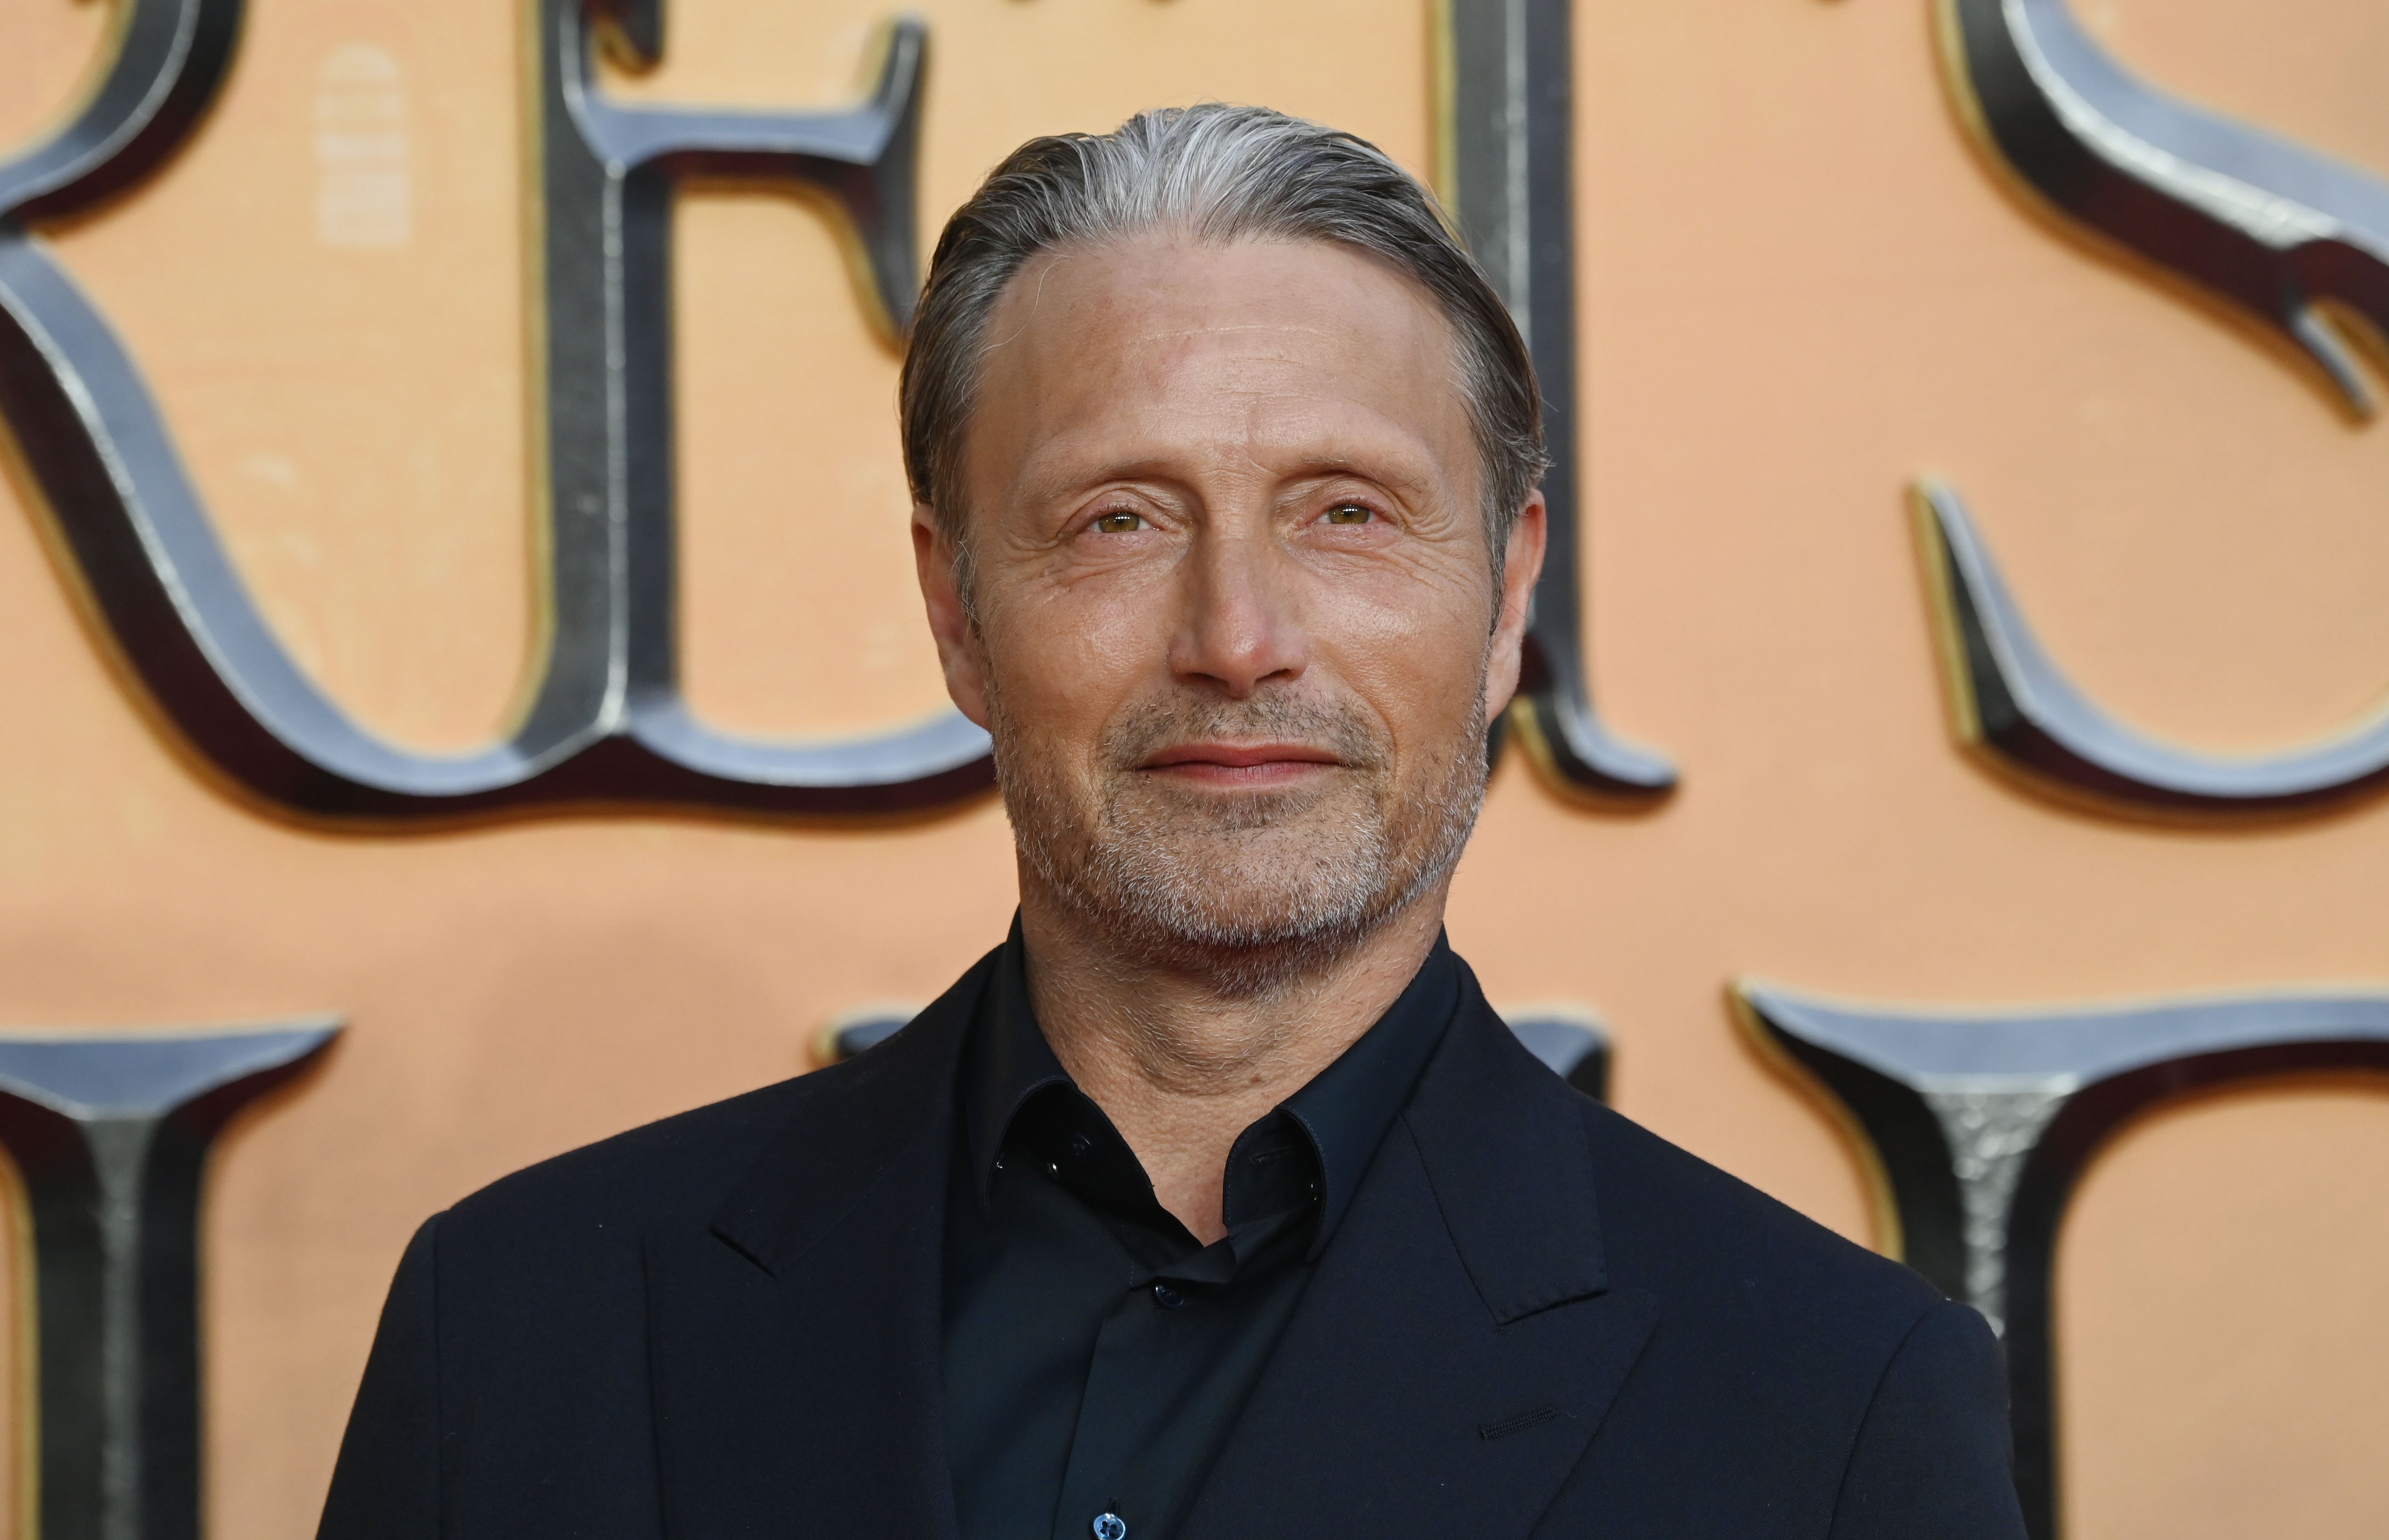 Mads Mikkelsen attends the London premiere for Fantastic Beasts: The Secrets of Dumbledore